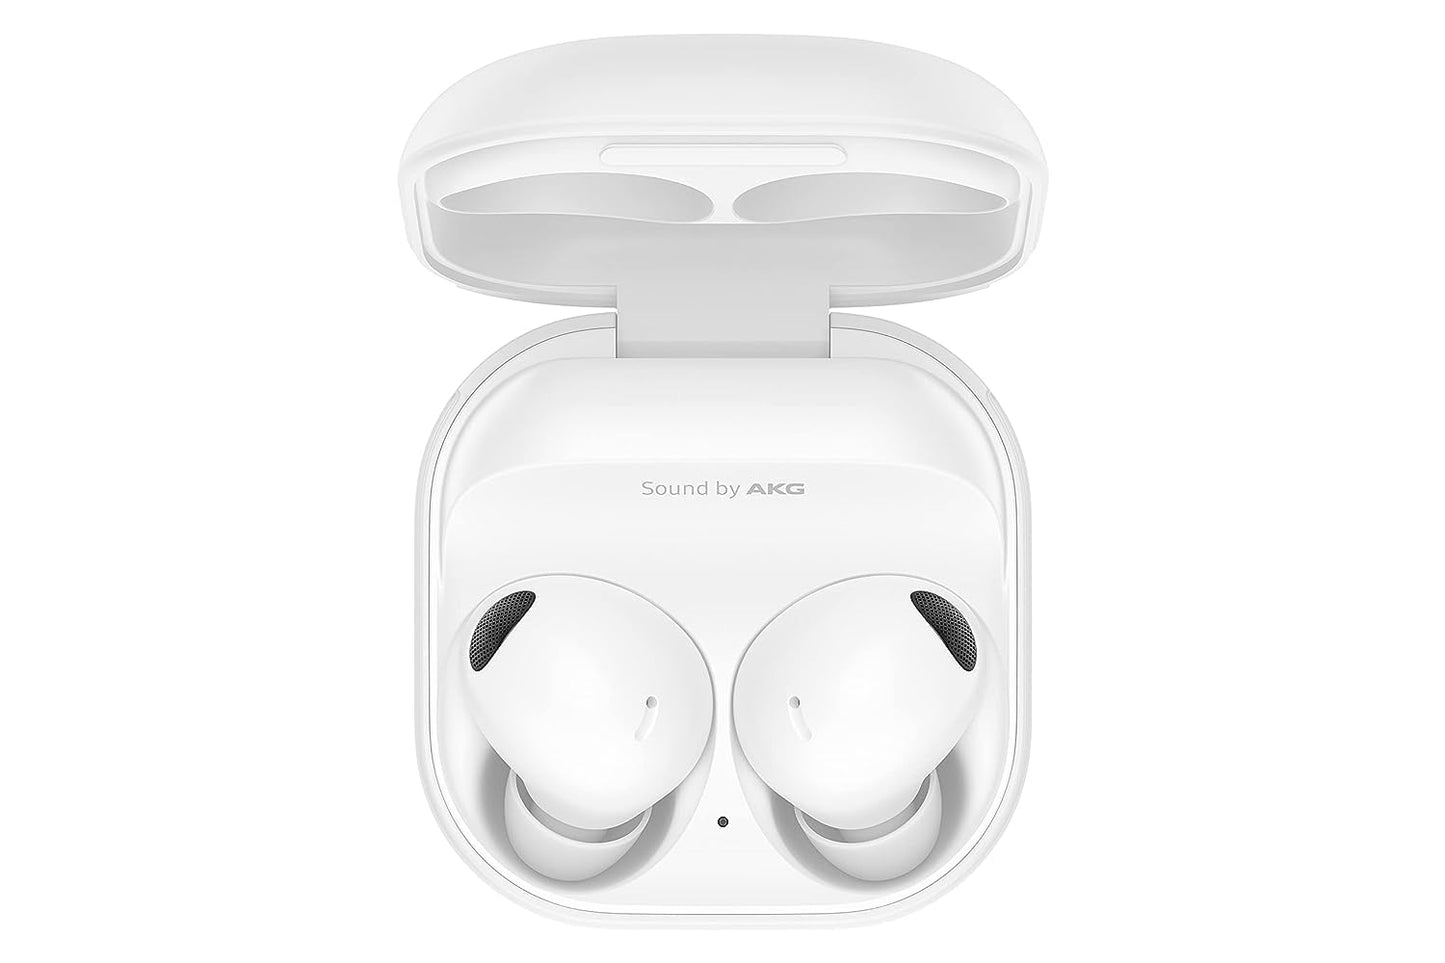 SAMSUNG Galaxy Buds 2 Pro True Wireless Bluetooth Earbuds, Noise Cancelling, Hi-Fi Sound, 360 Audio, Comfort In Ear Fit, HD Voice, Conversation Mode, IPX7 Water Resistant, US Version, White